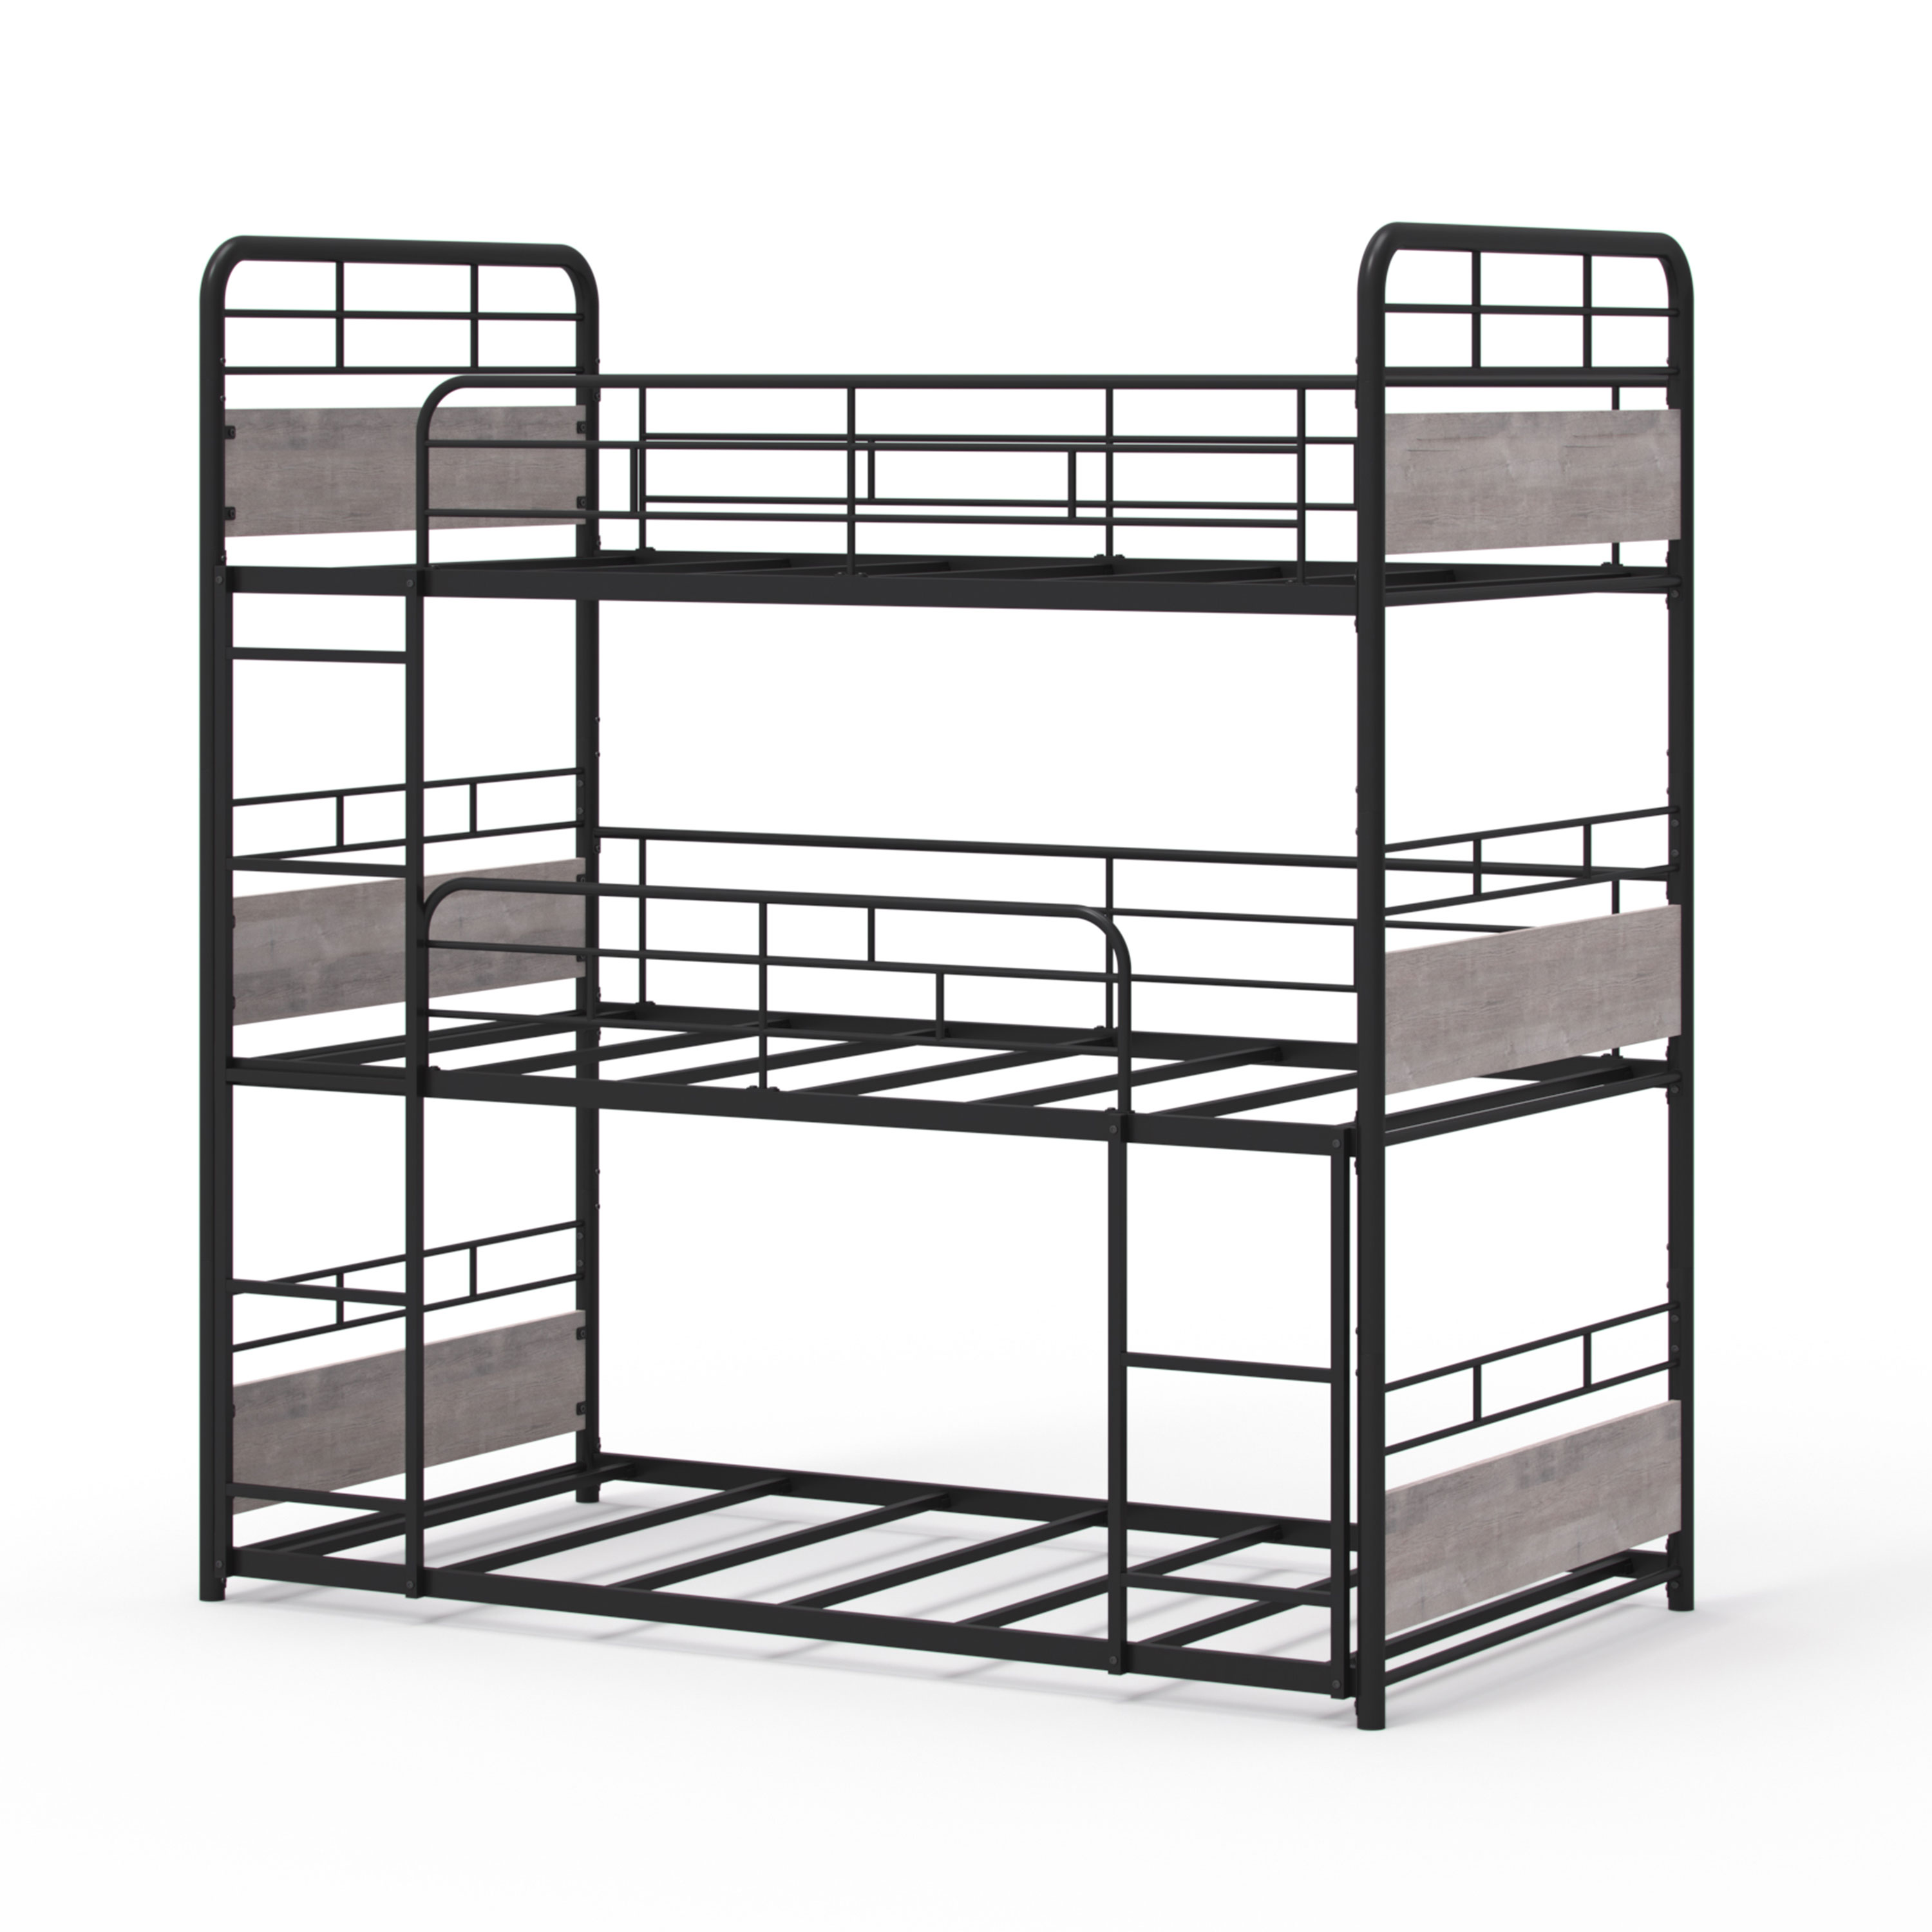 Better Homes & Gardens Anniston Convertible Black Metal Triple Twin Bunk Bed, Gray Wood Accents - image 22 of 26